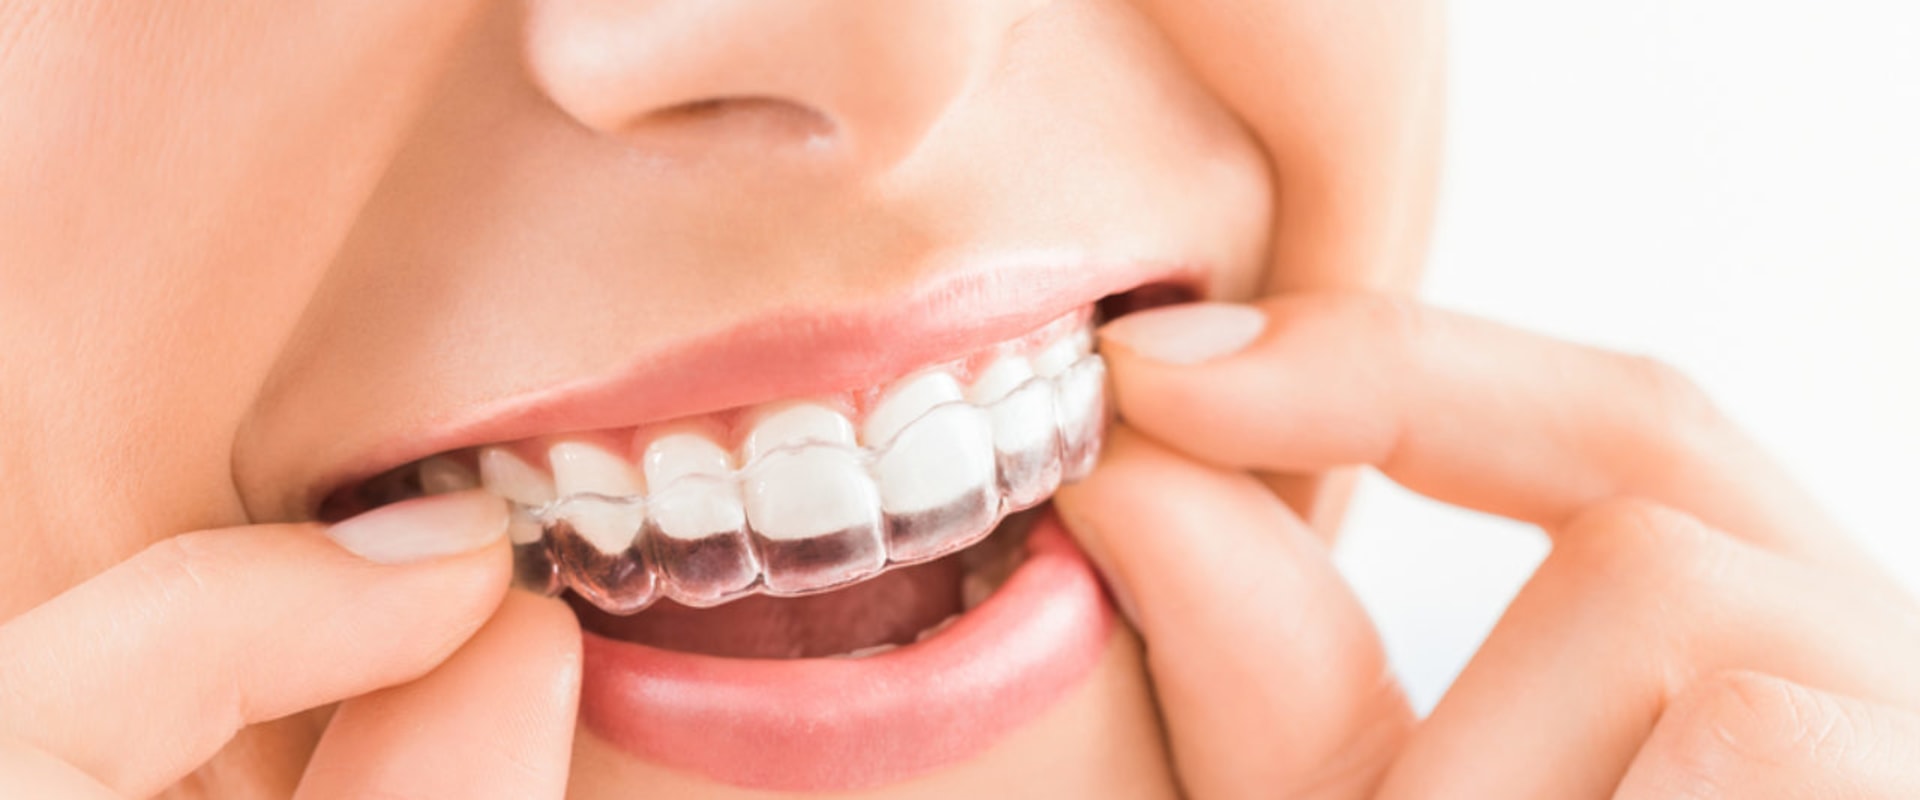 Invisalign: What Teeth Move First and How to Speed Up the Process